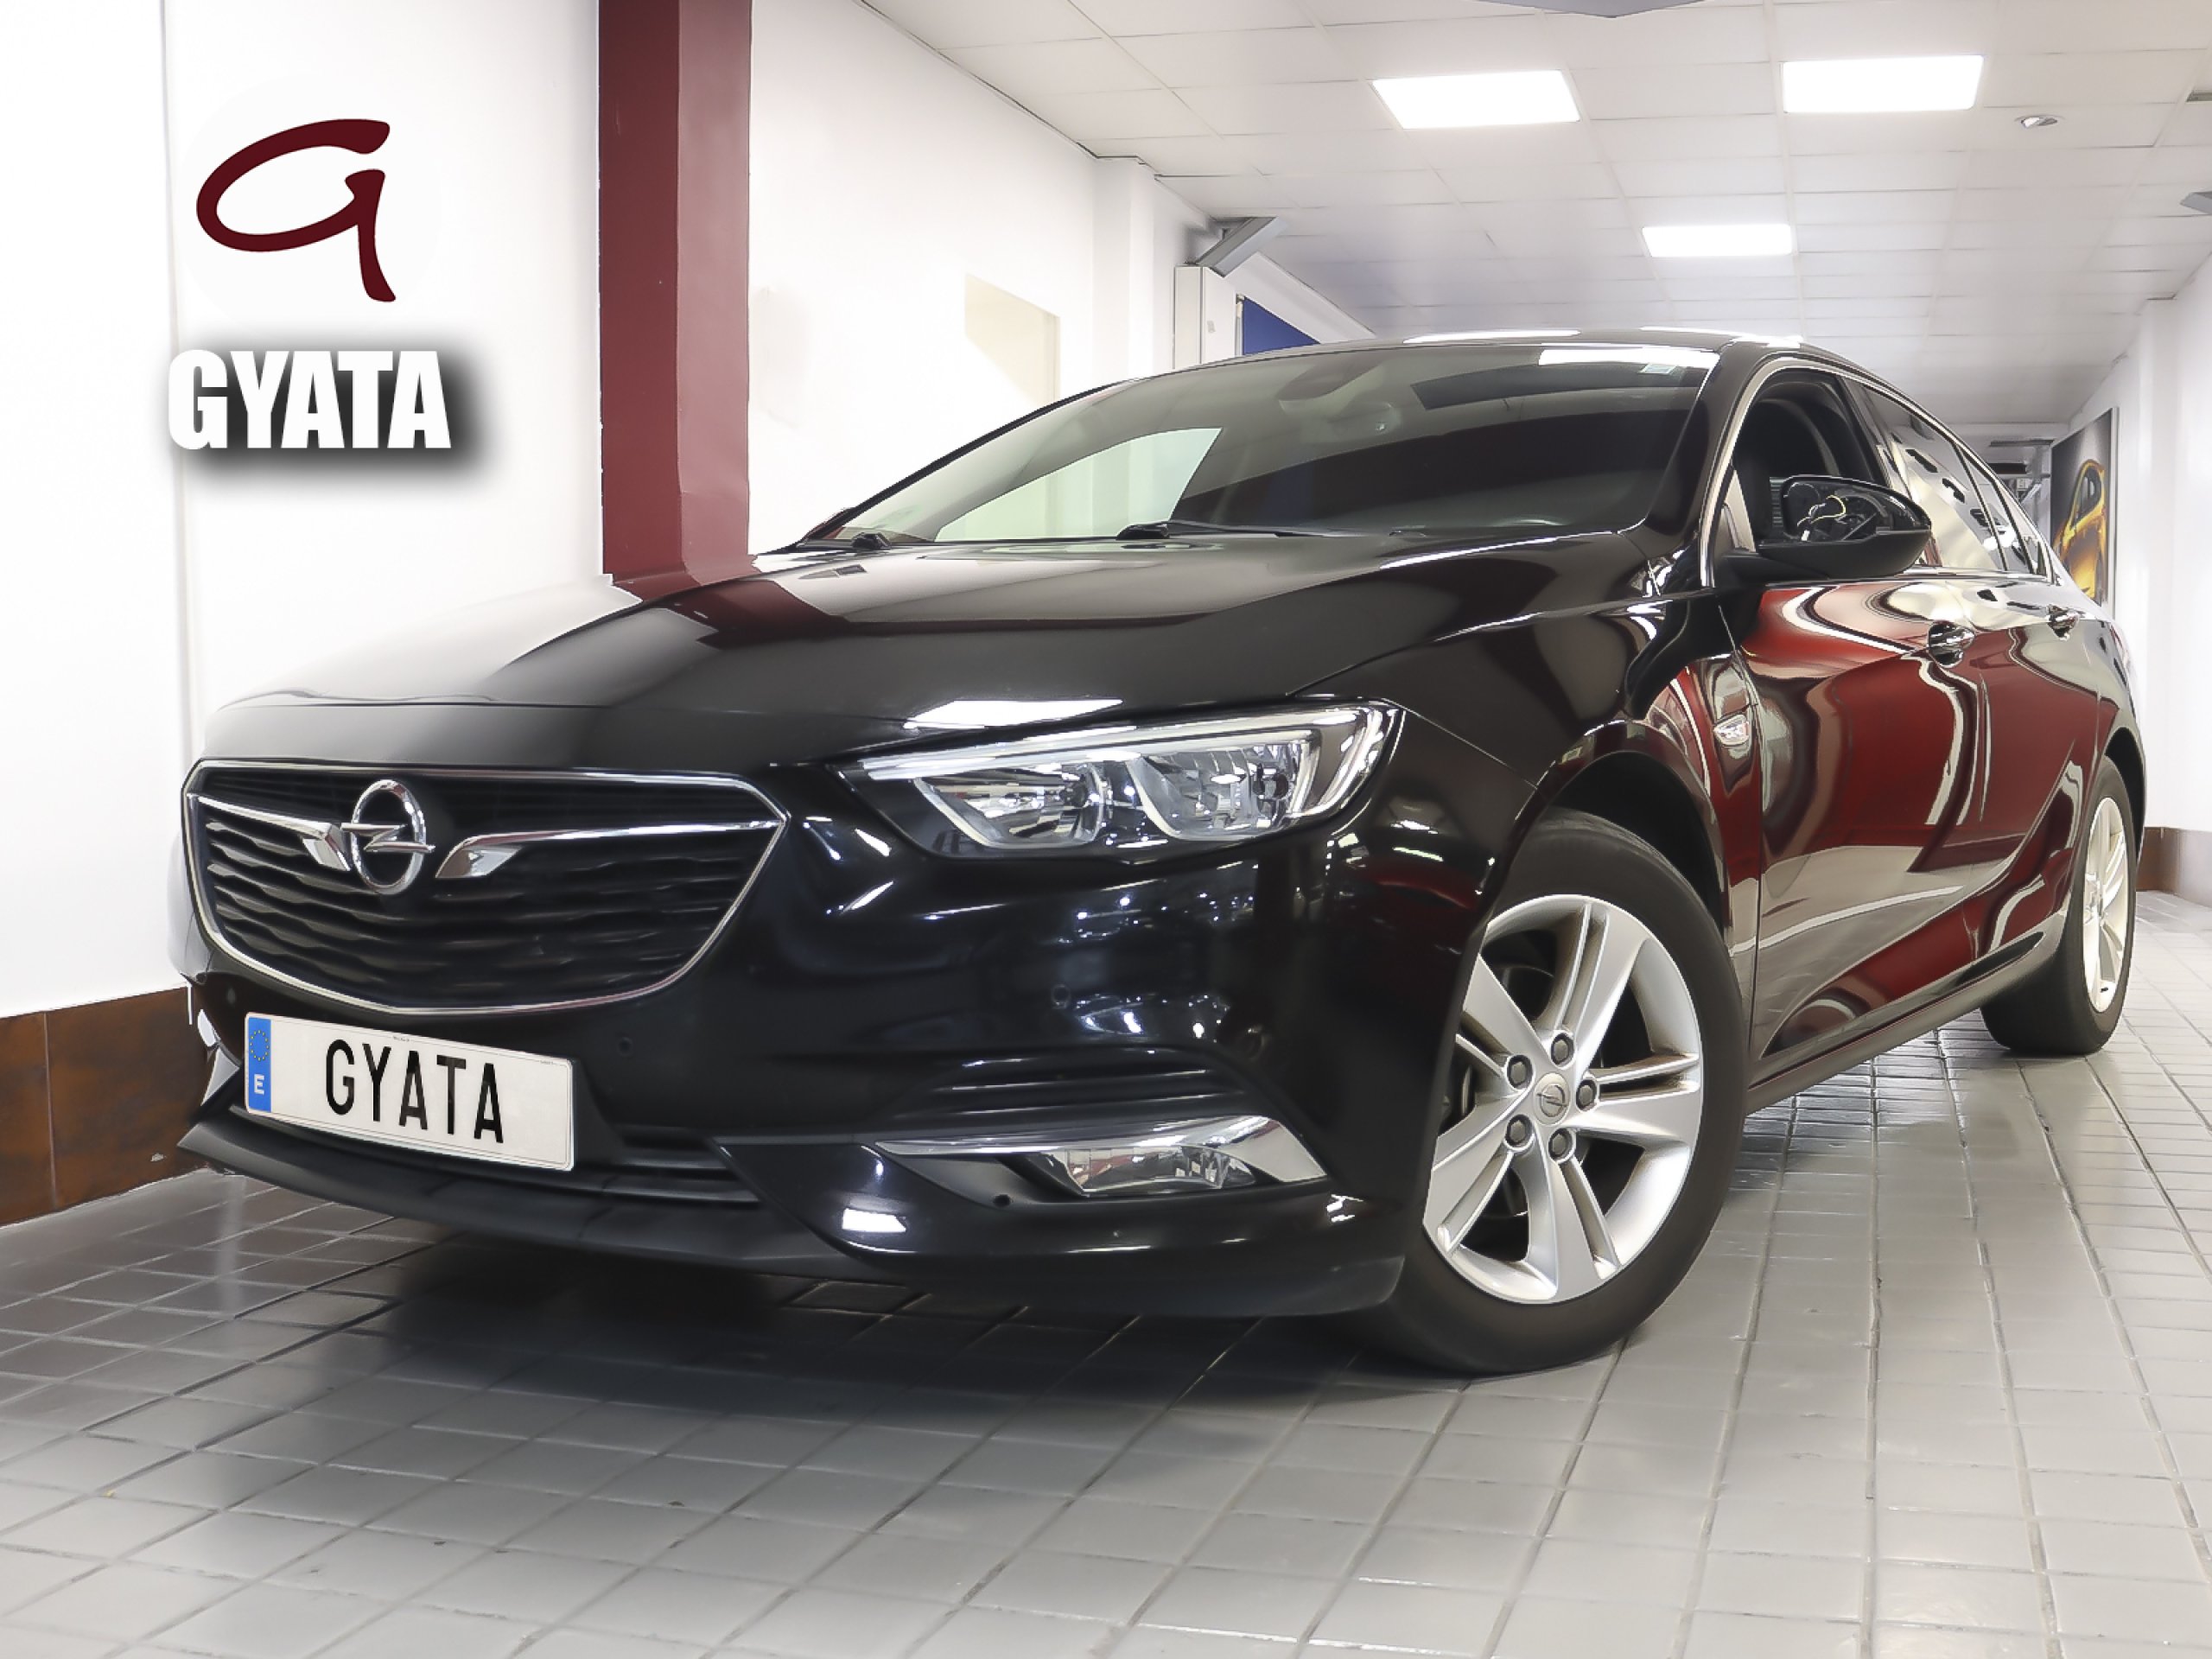 Opel Insignia GS 1.5 Turbo XFT Excellence Auto 121 kW (165 CV) - Foto 1